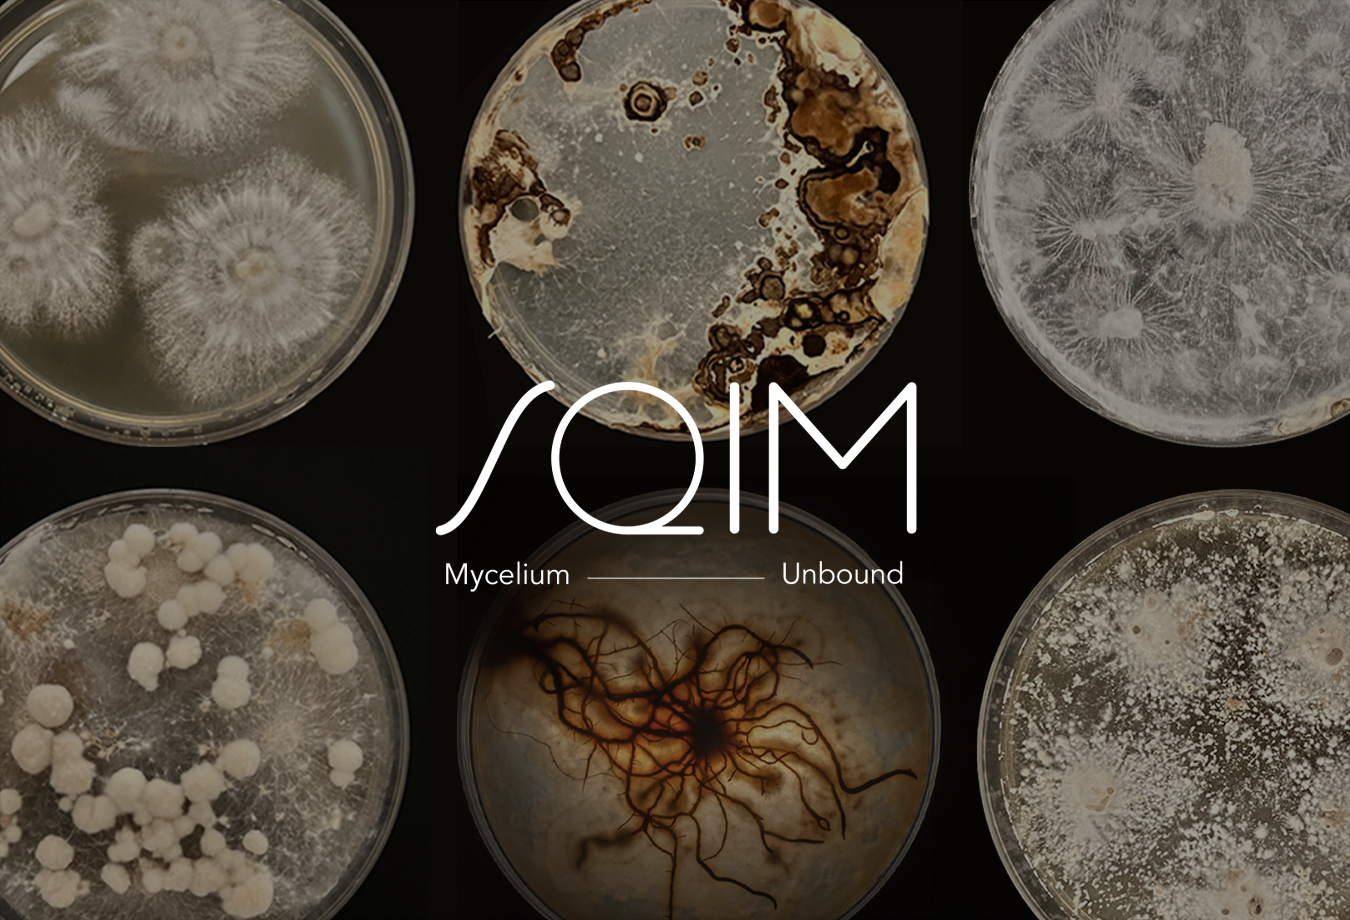 PRESS RELEASE: SQIM SECURES € 11 MILLION IN SERIES A FUNDING FOR INDUSTRIALIZATION OF MYCELIUM-BASED TECHNOLOGIES